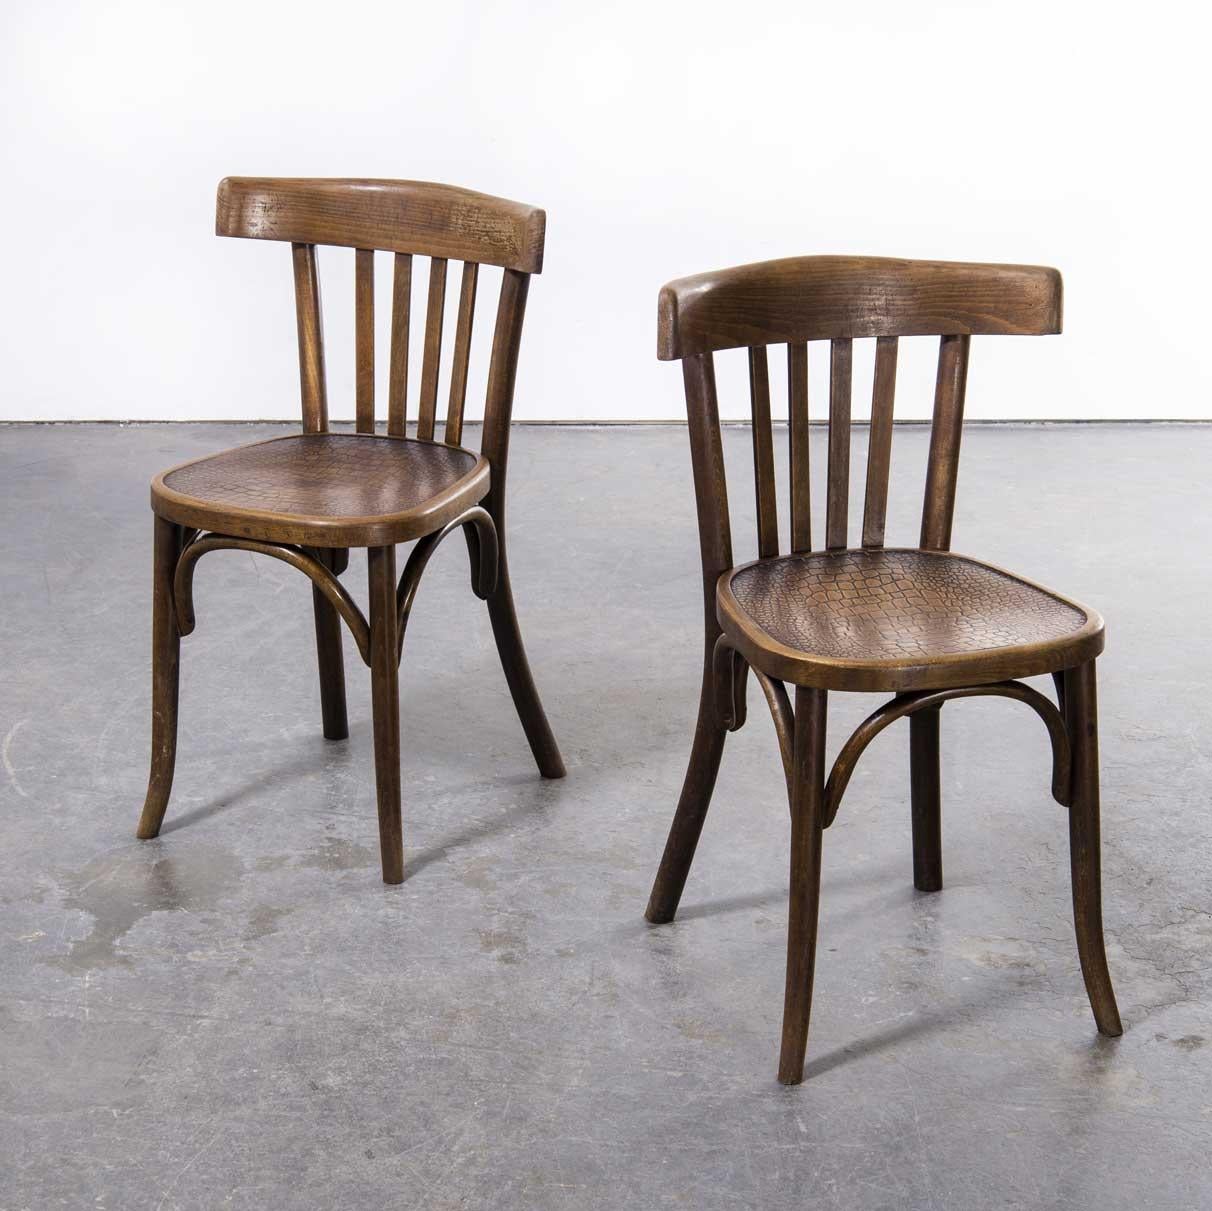 1940's Pair of Fischel Bentwood Chairs, Patterned Seat 1